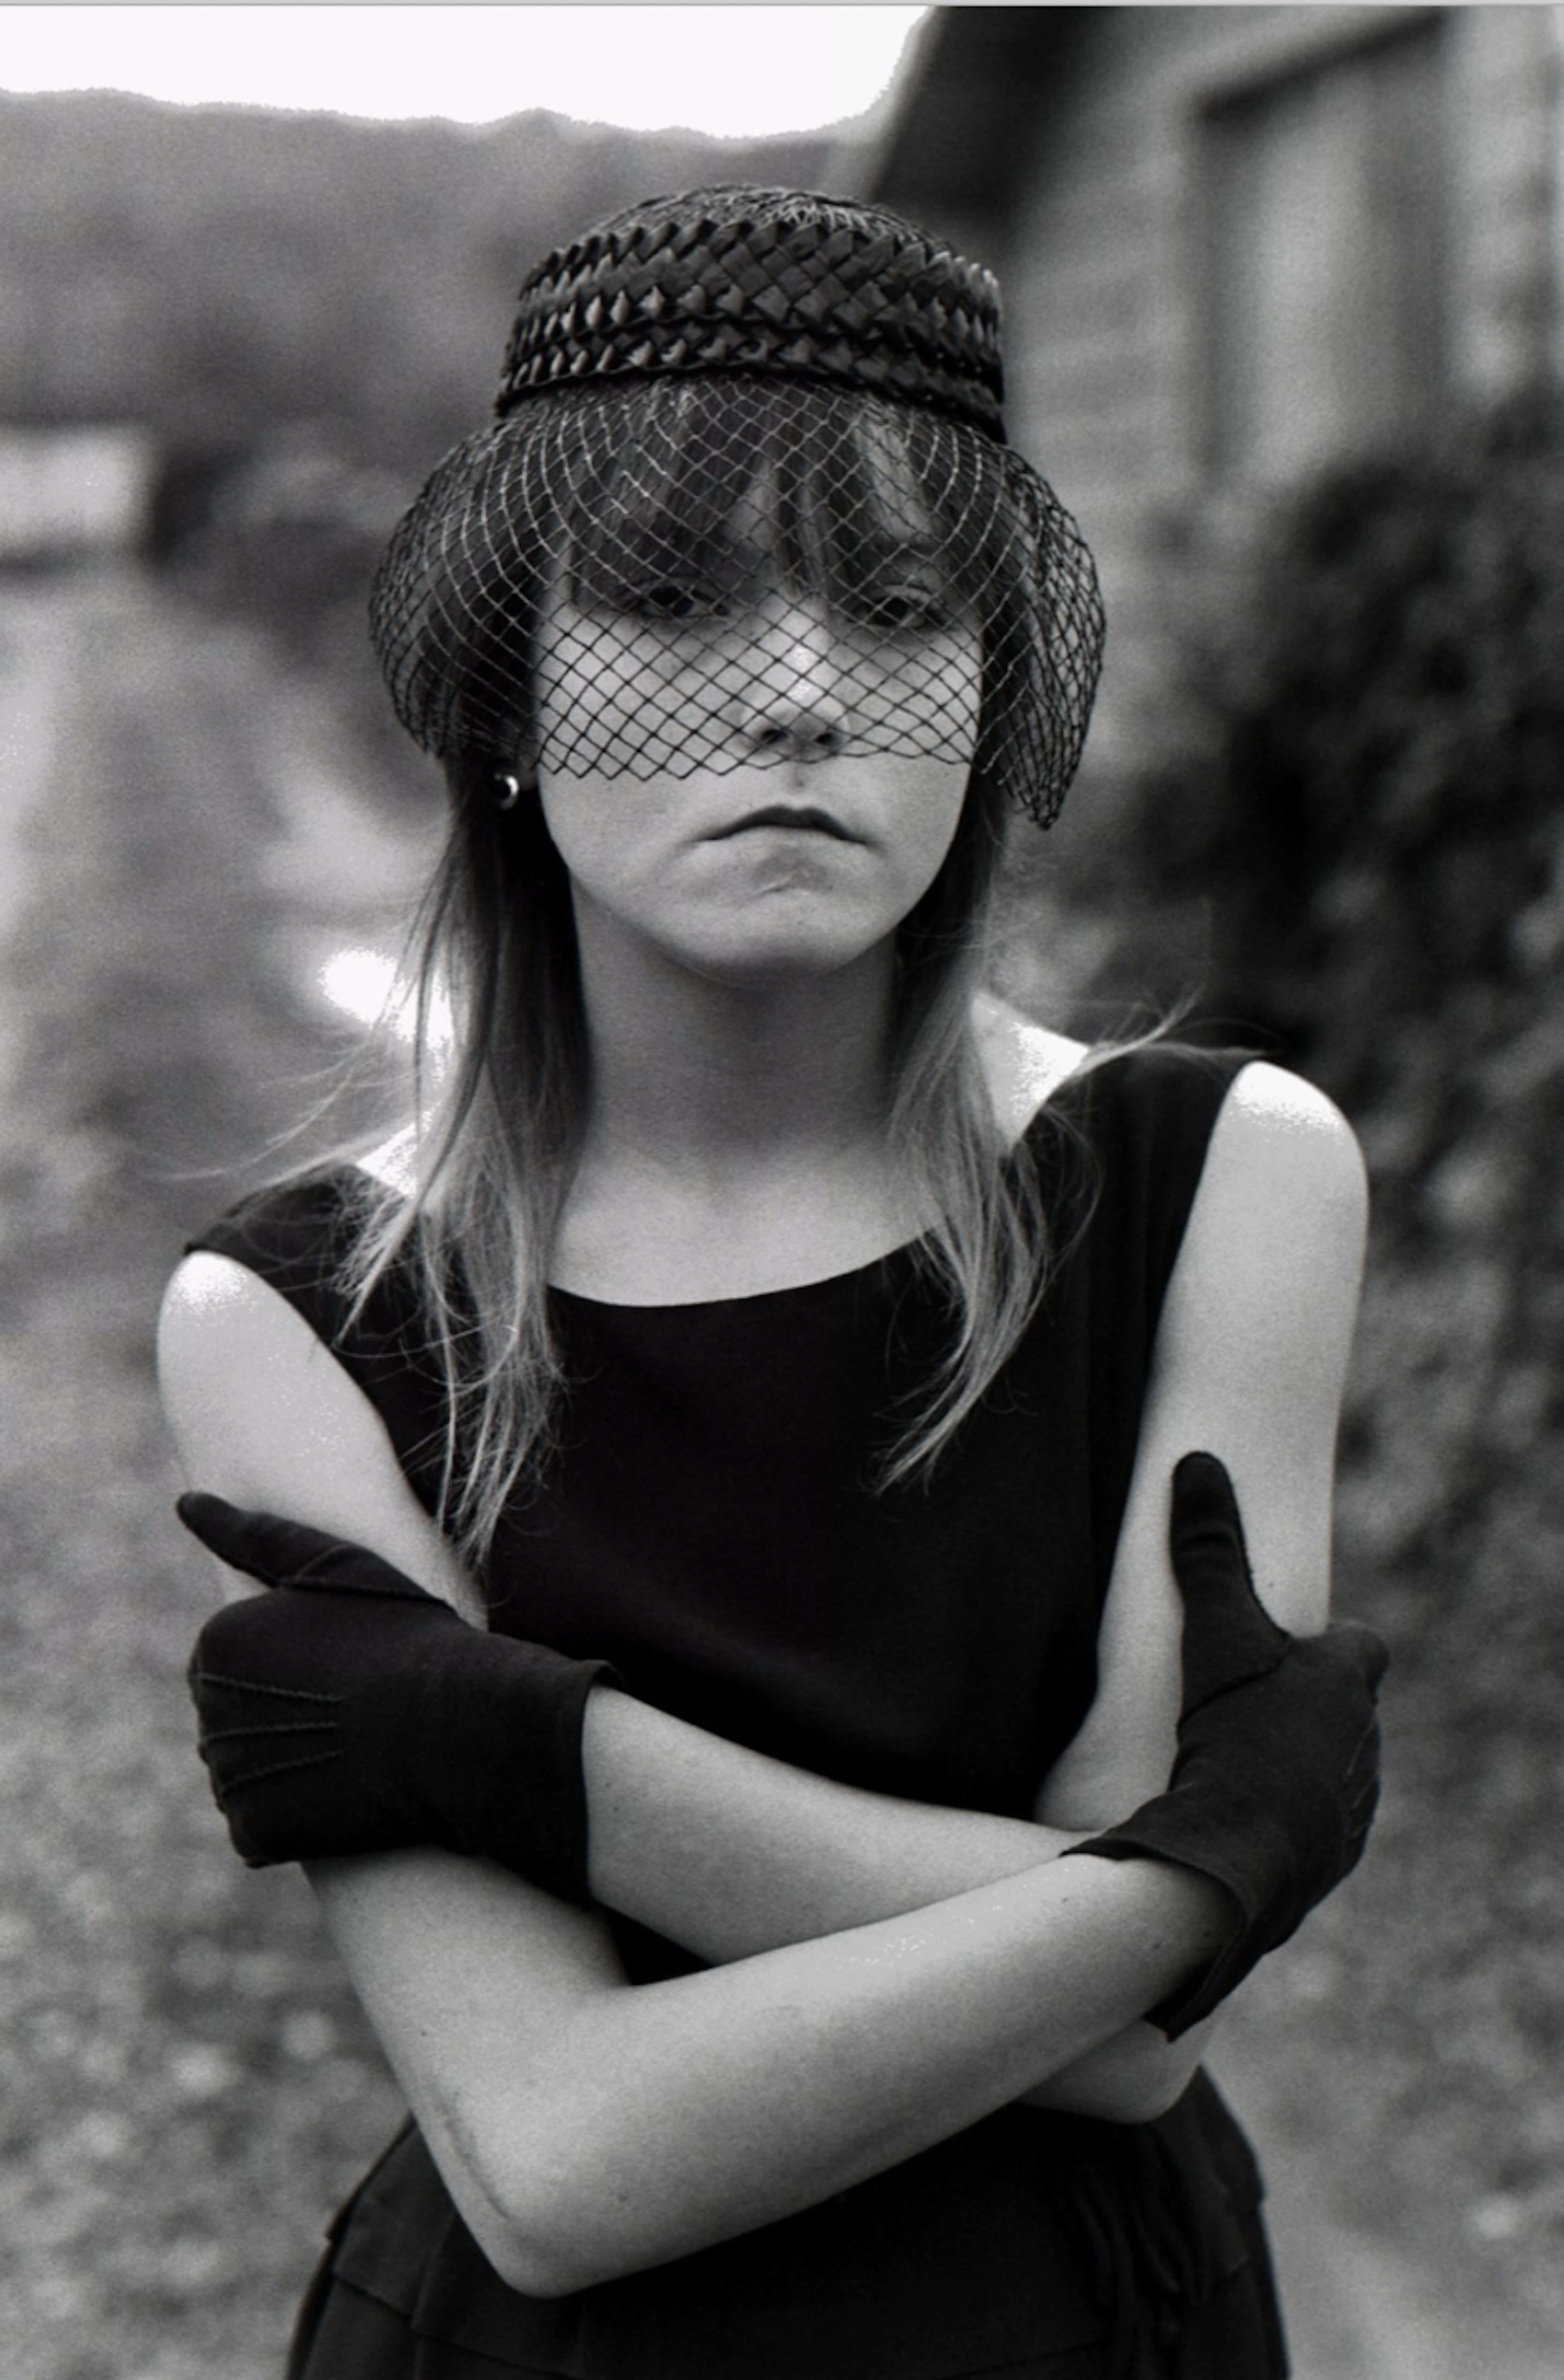 Mary Ellen Mark Black and White Photograph - Tiny in Her Halloween Costume, Seattle, Washington